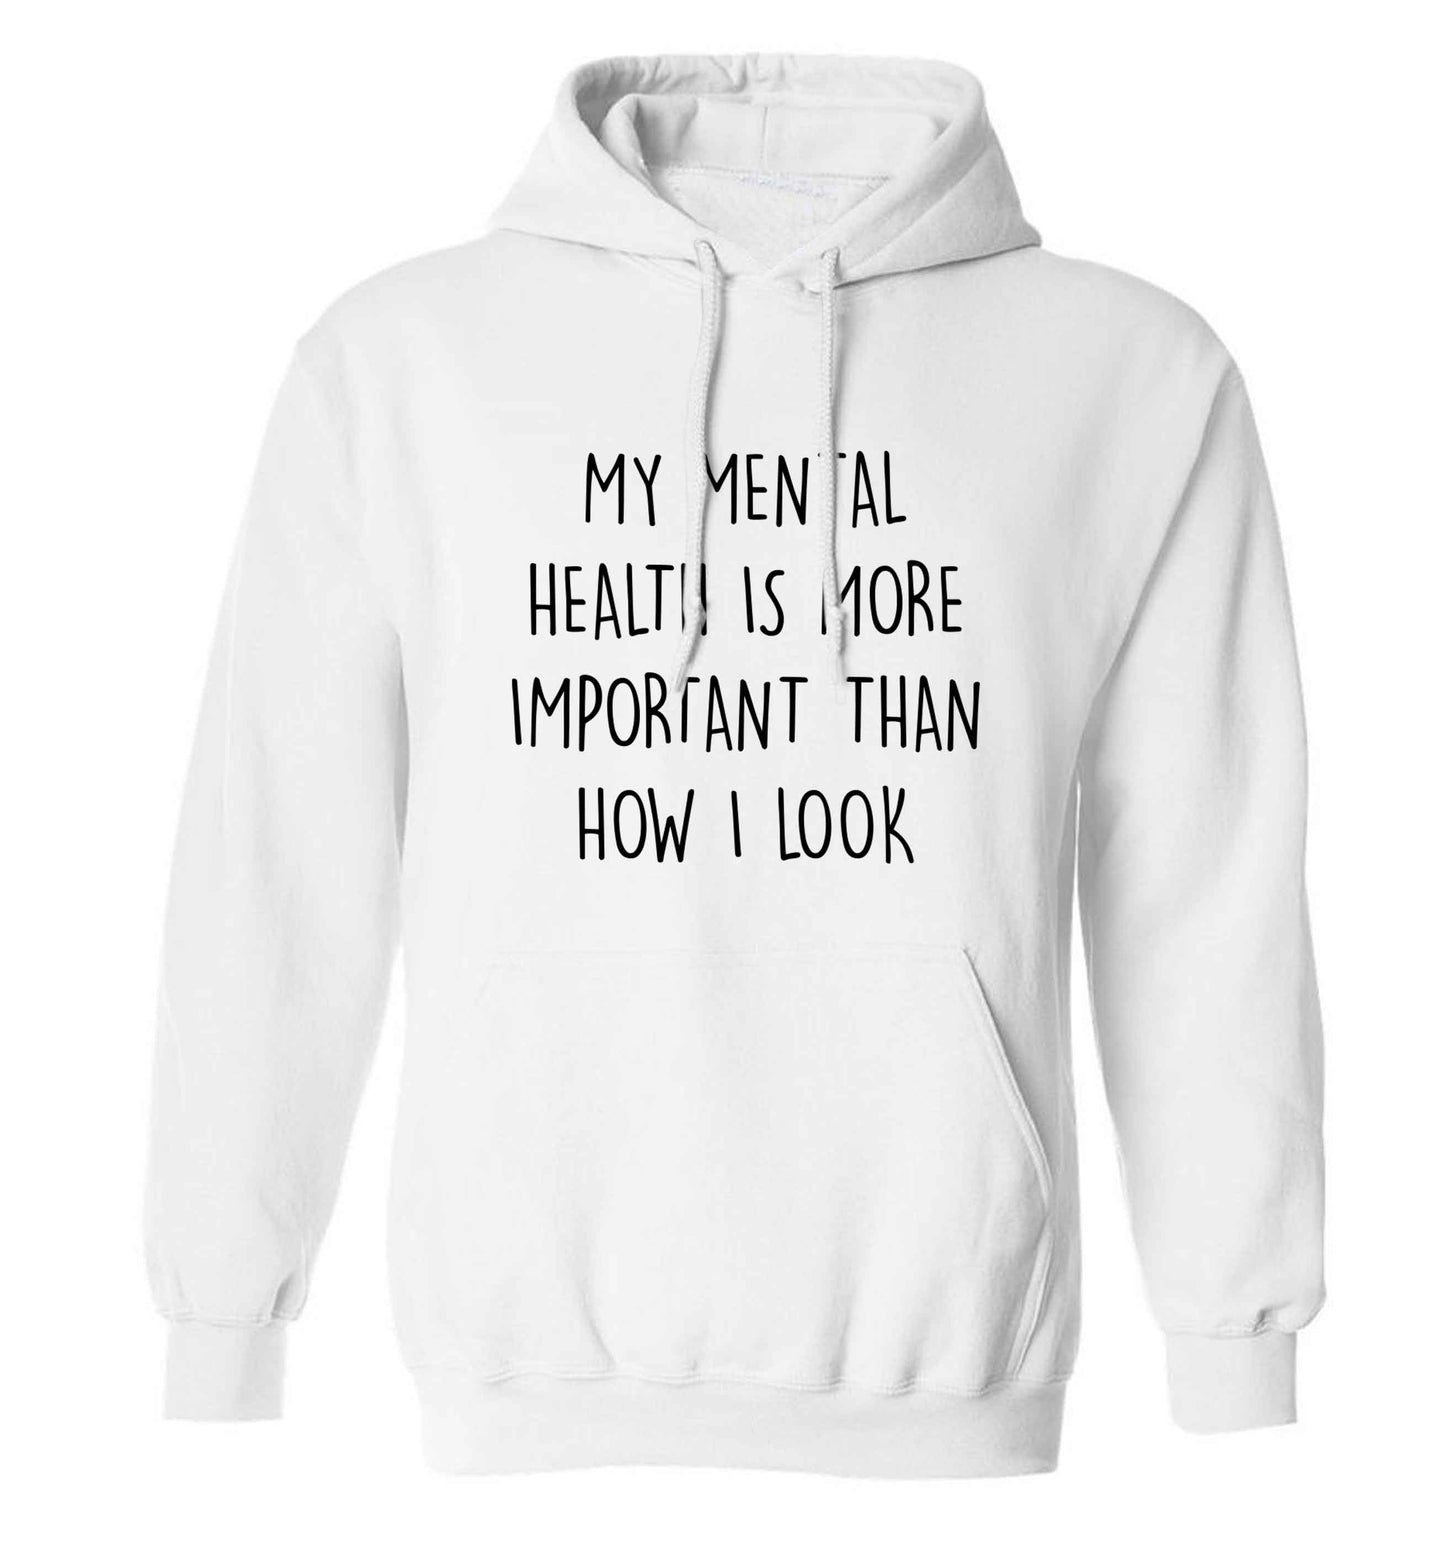 My mental health is more importnat than how I look adults unisex white hoodie 2XL